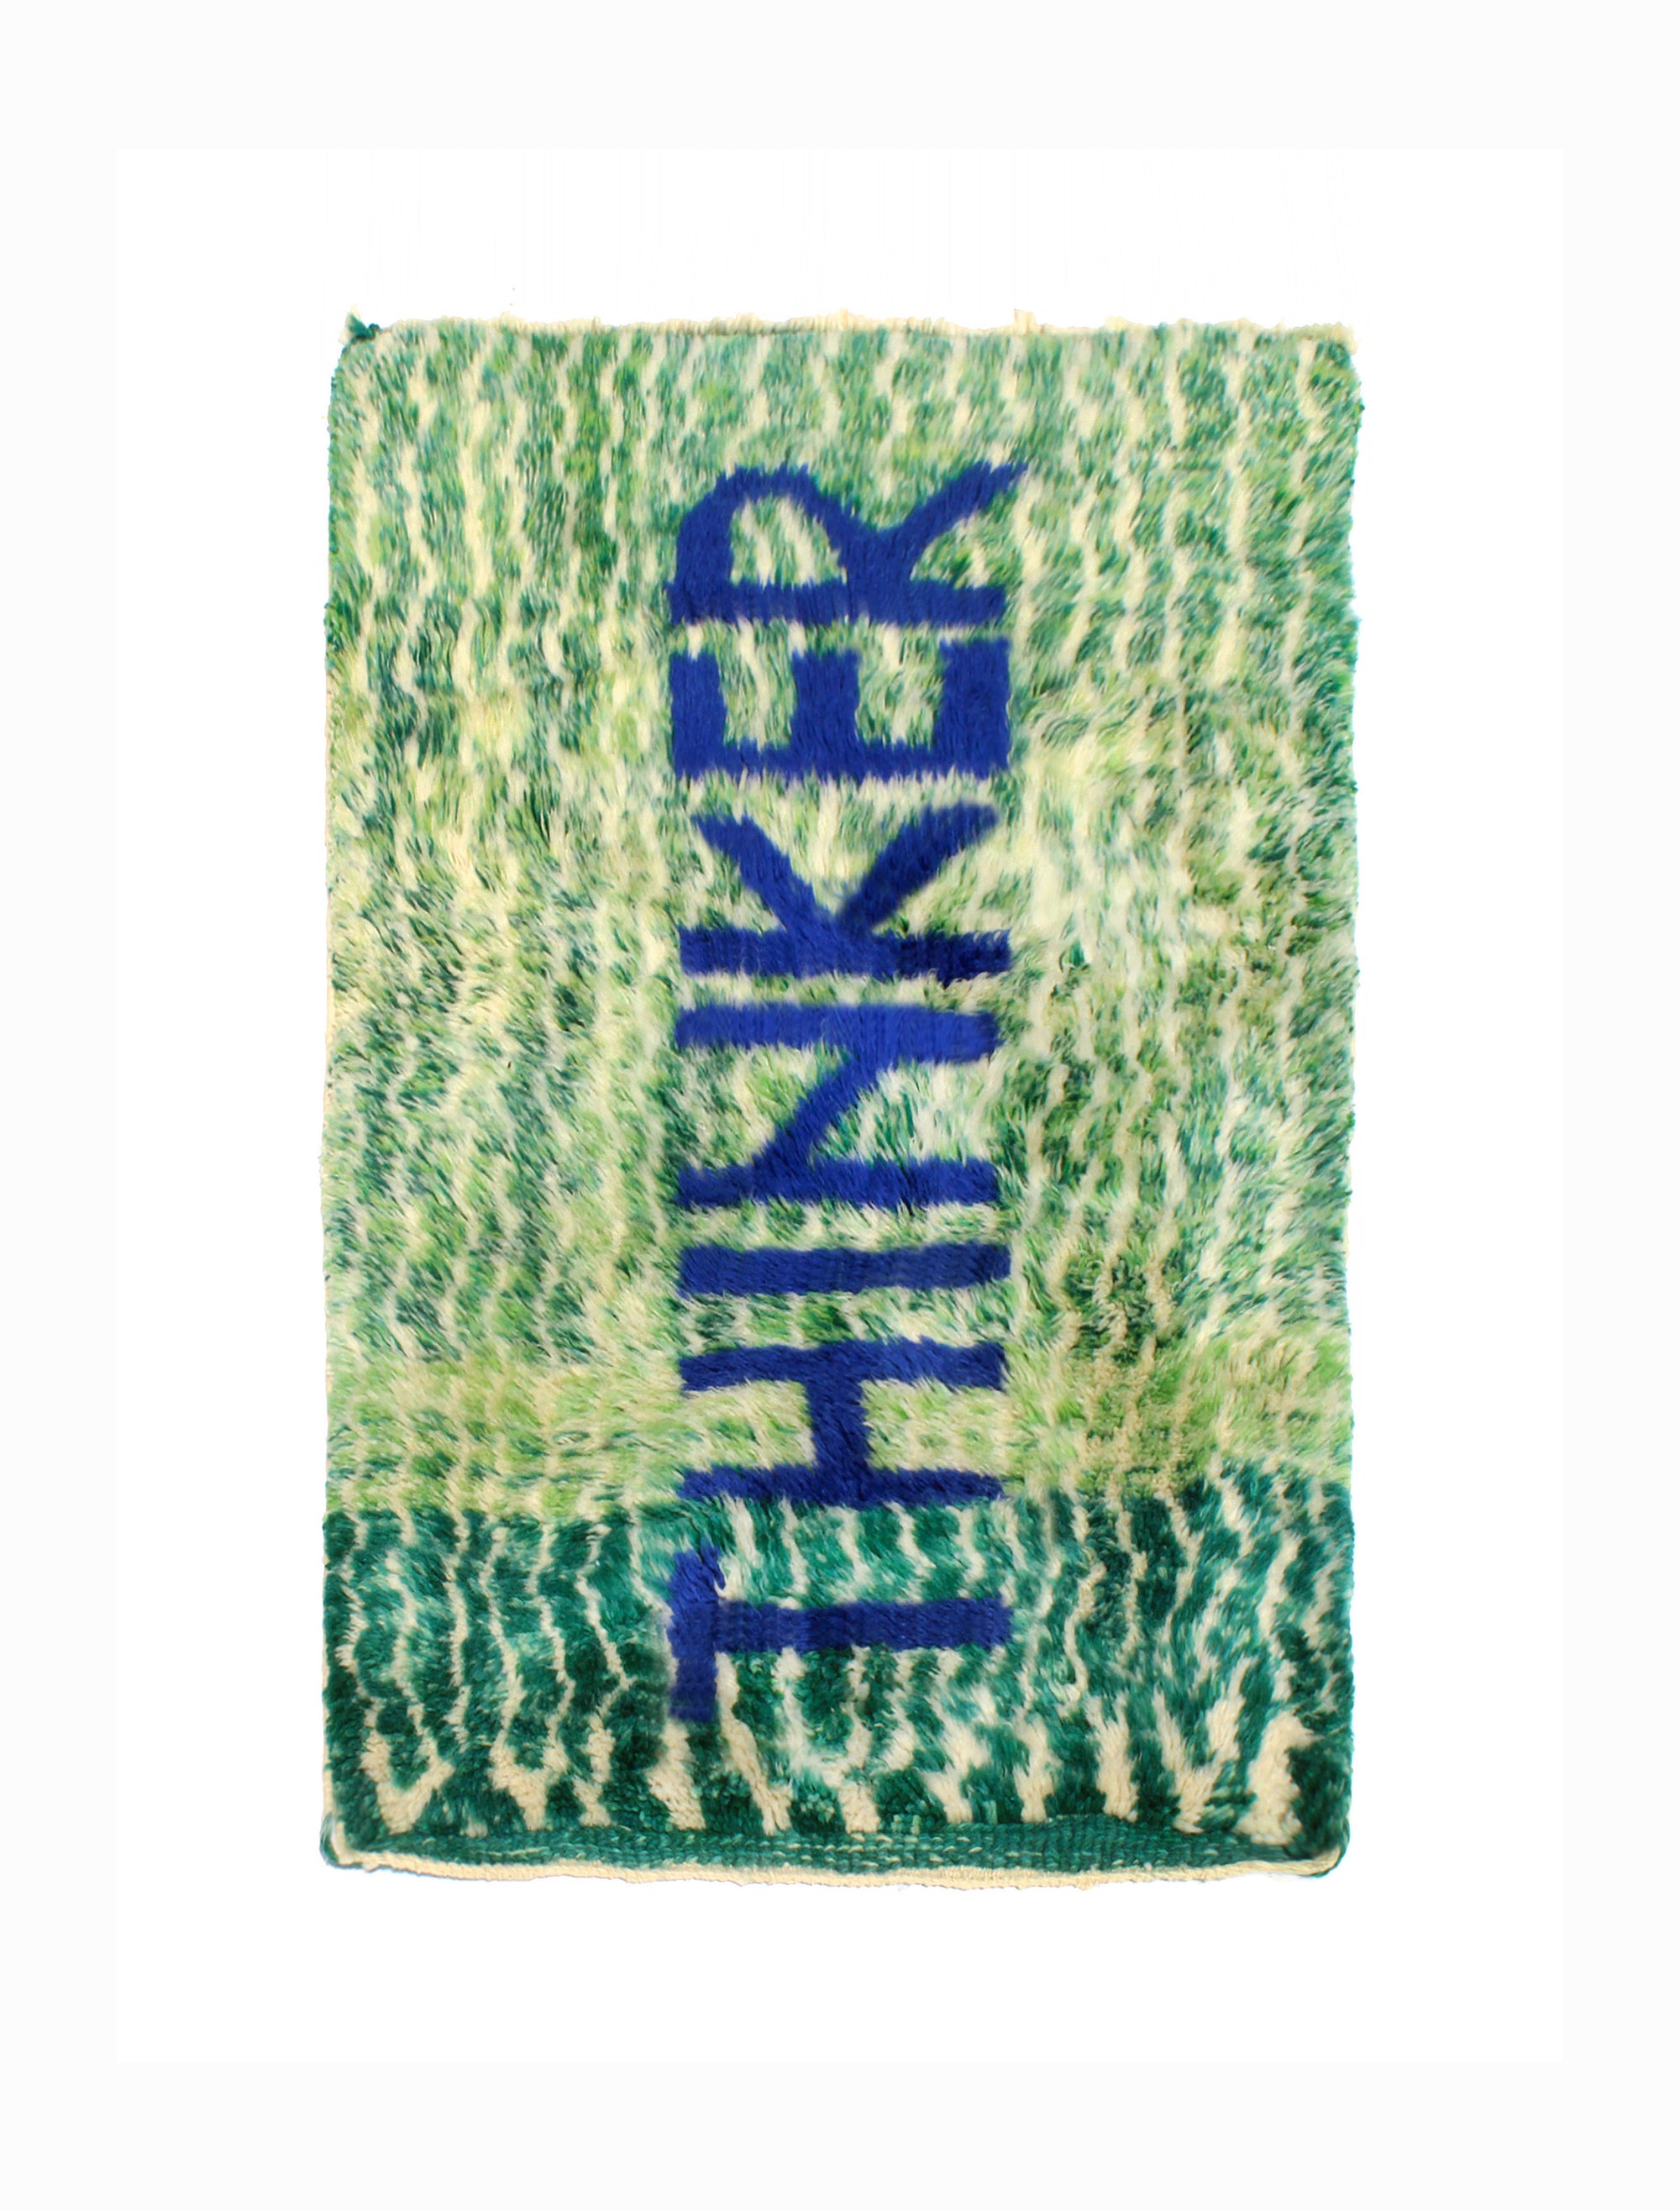 Introducing the 'Verdant Thinker Rug,' where the profound 'Thinker' letter is meticulously woven in blue yarn. Set against a backdrop of unique green and ivory curved wave lines, this rug brings a touch of intellectual charm to your space. Elevate your home with its artistic blend of colors and textures, creating a vibrant and thoughtful ambiance that resonates with modern sophistication.